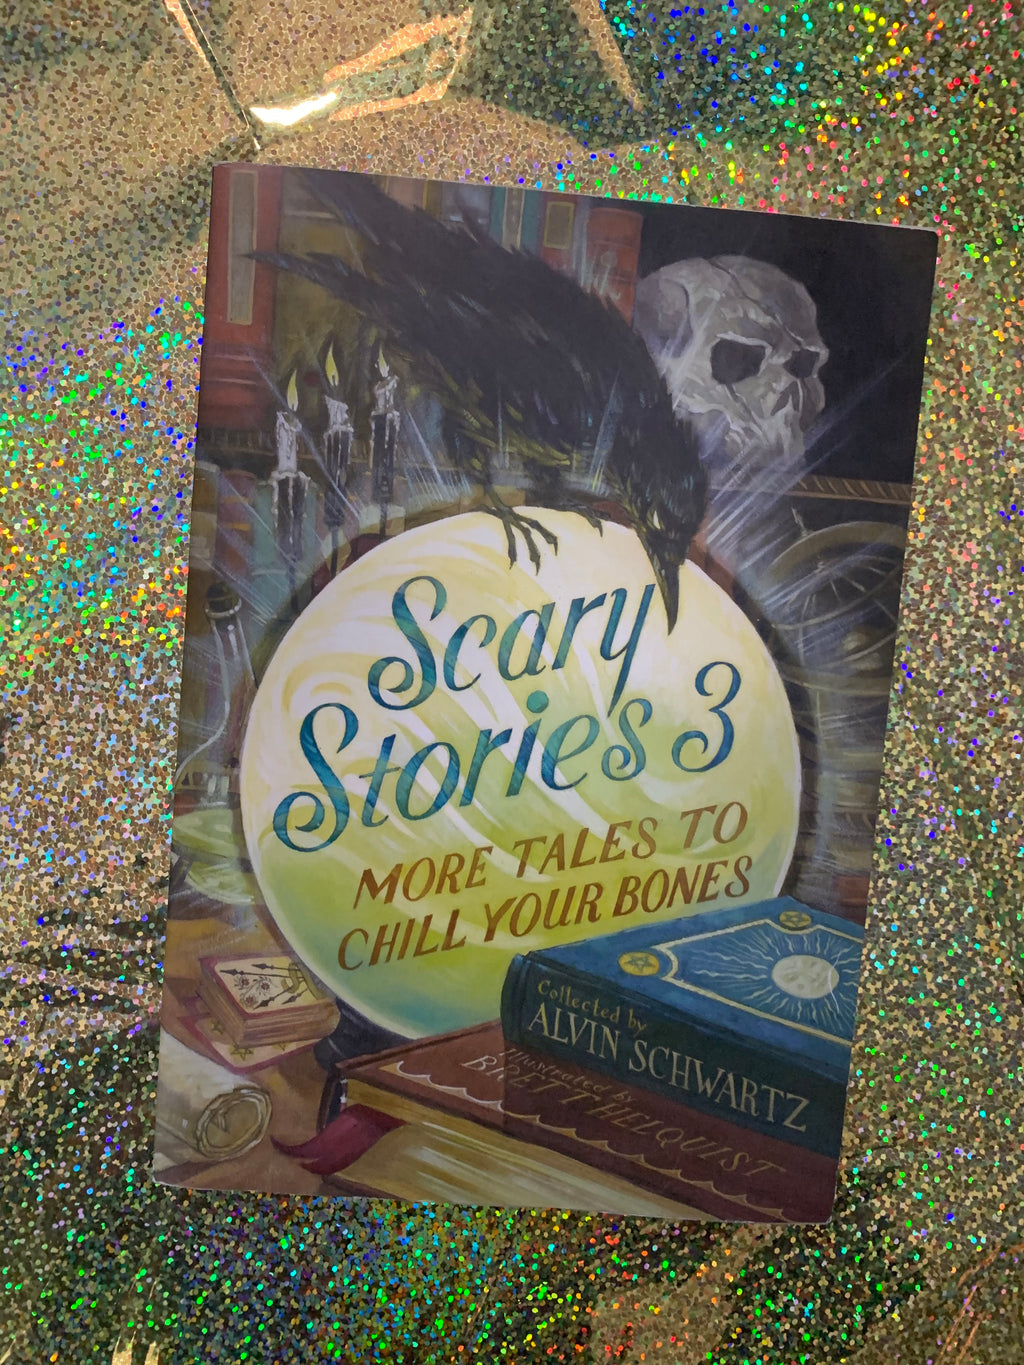 Scary Stories 3: More Tales to Chill Your Bones- Collected By Alvin Schwartz